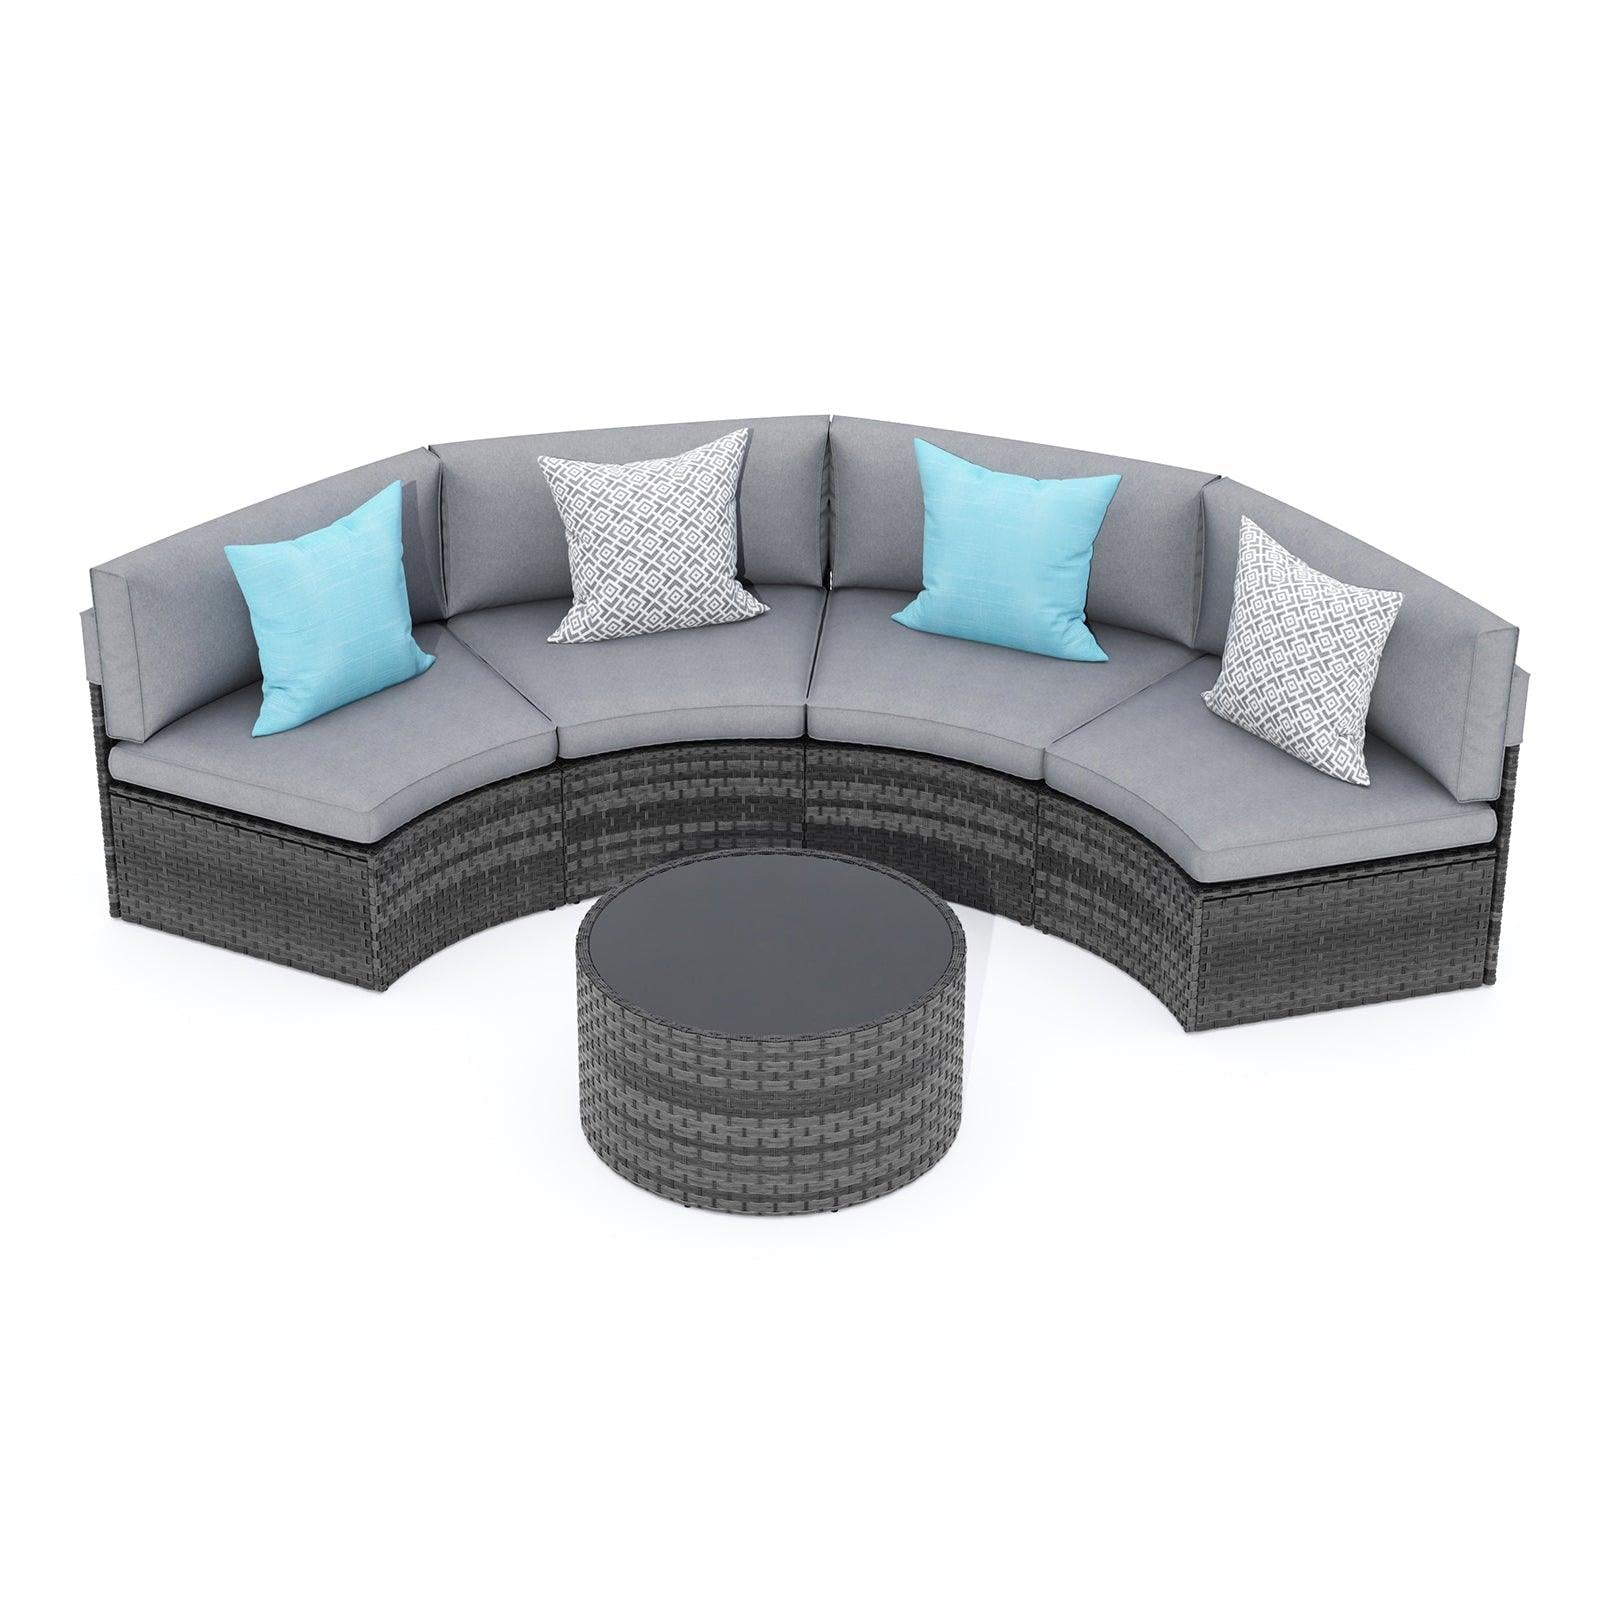 Halo IV 5-pc. Outdoor Curved Sectionals, Outdoor Half-Moon Sectional Set, Grey sale #Pieces_5-pc.